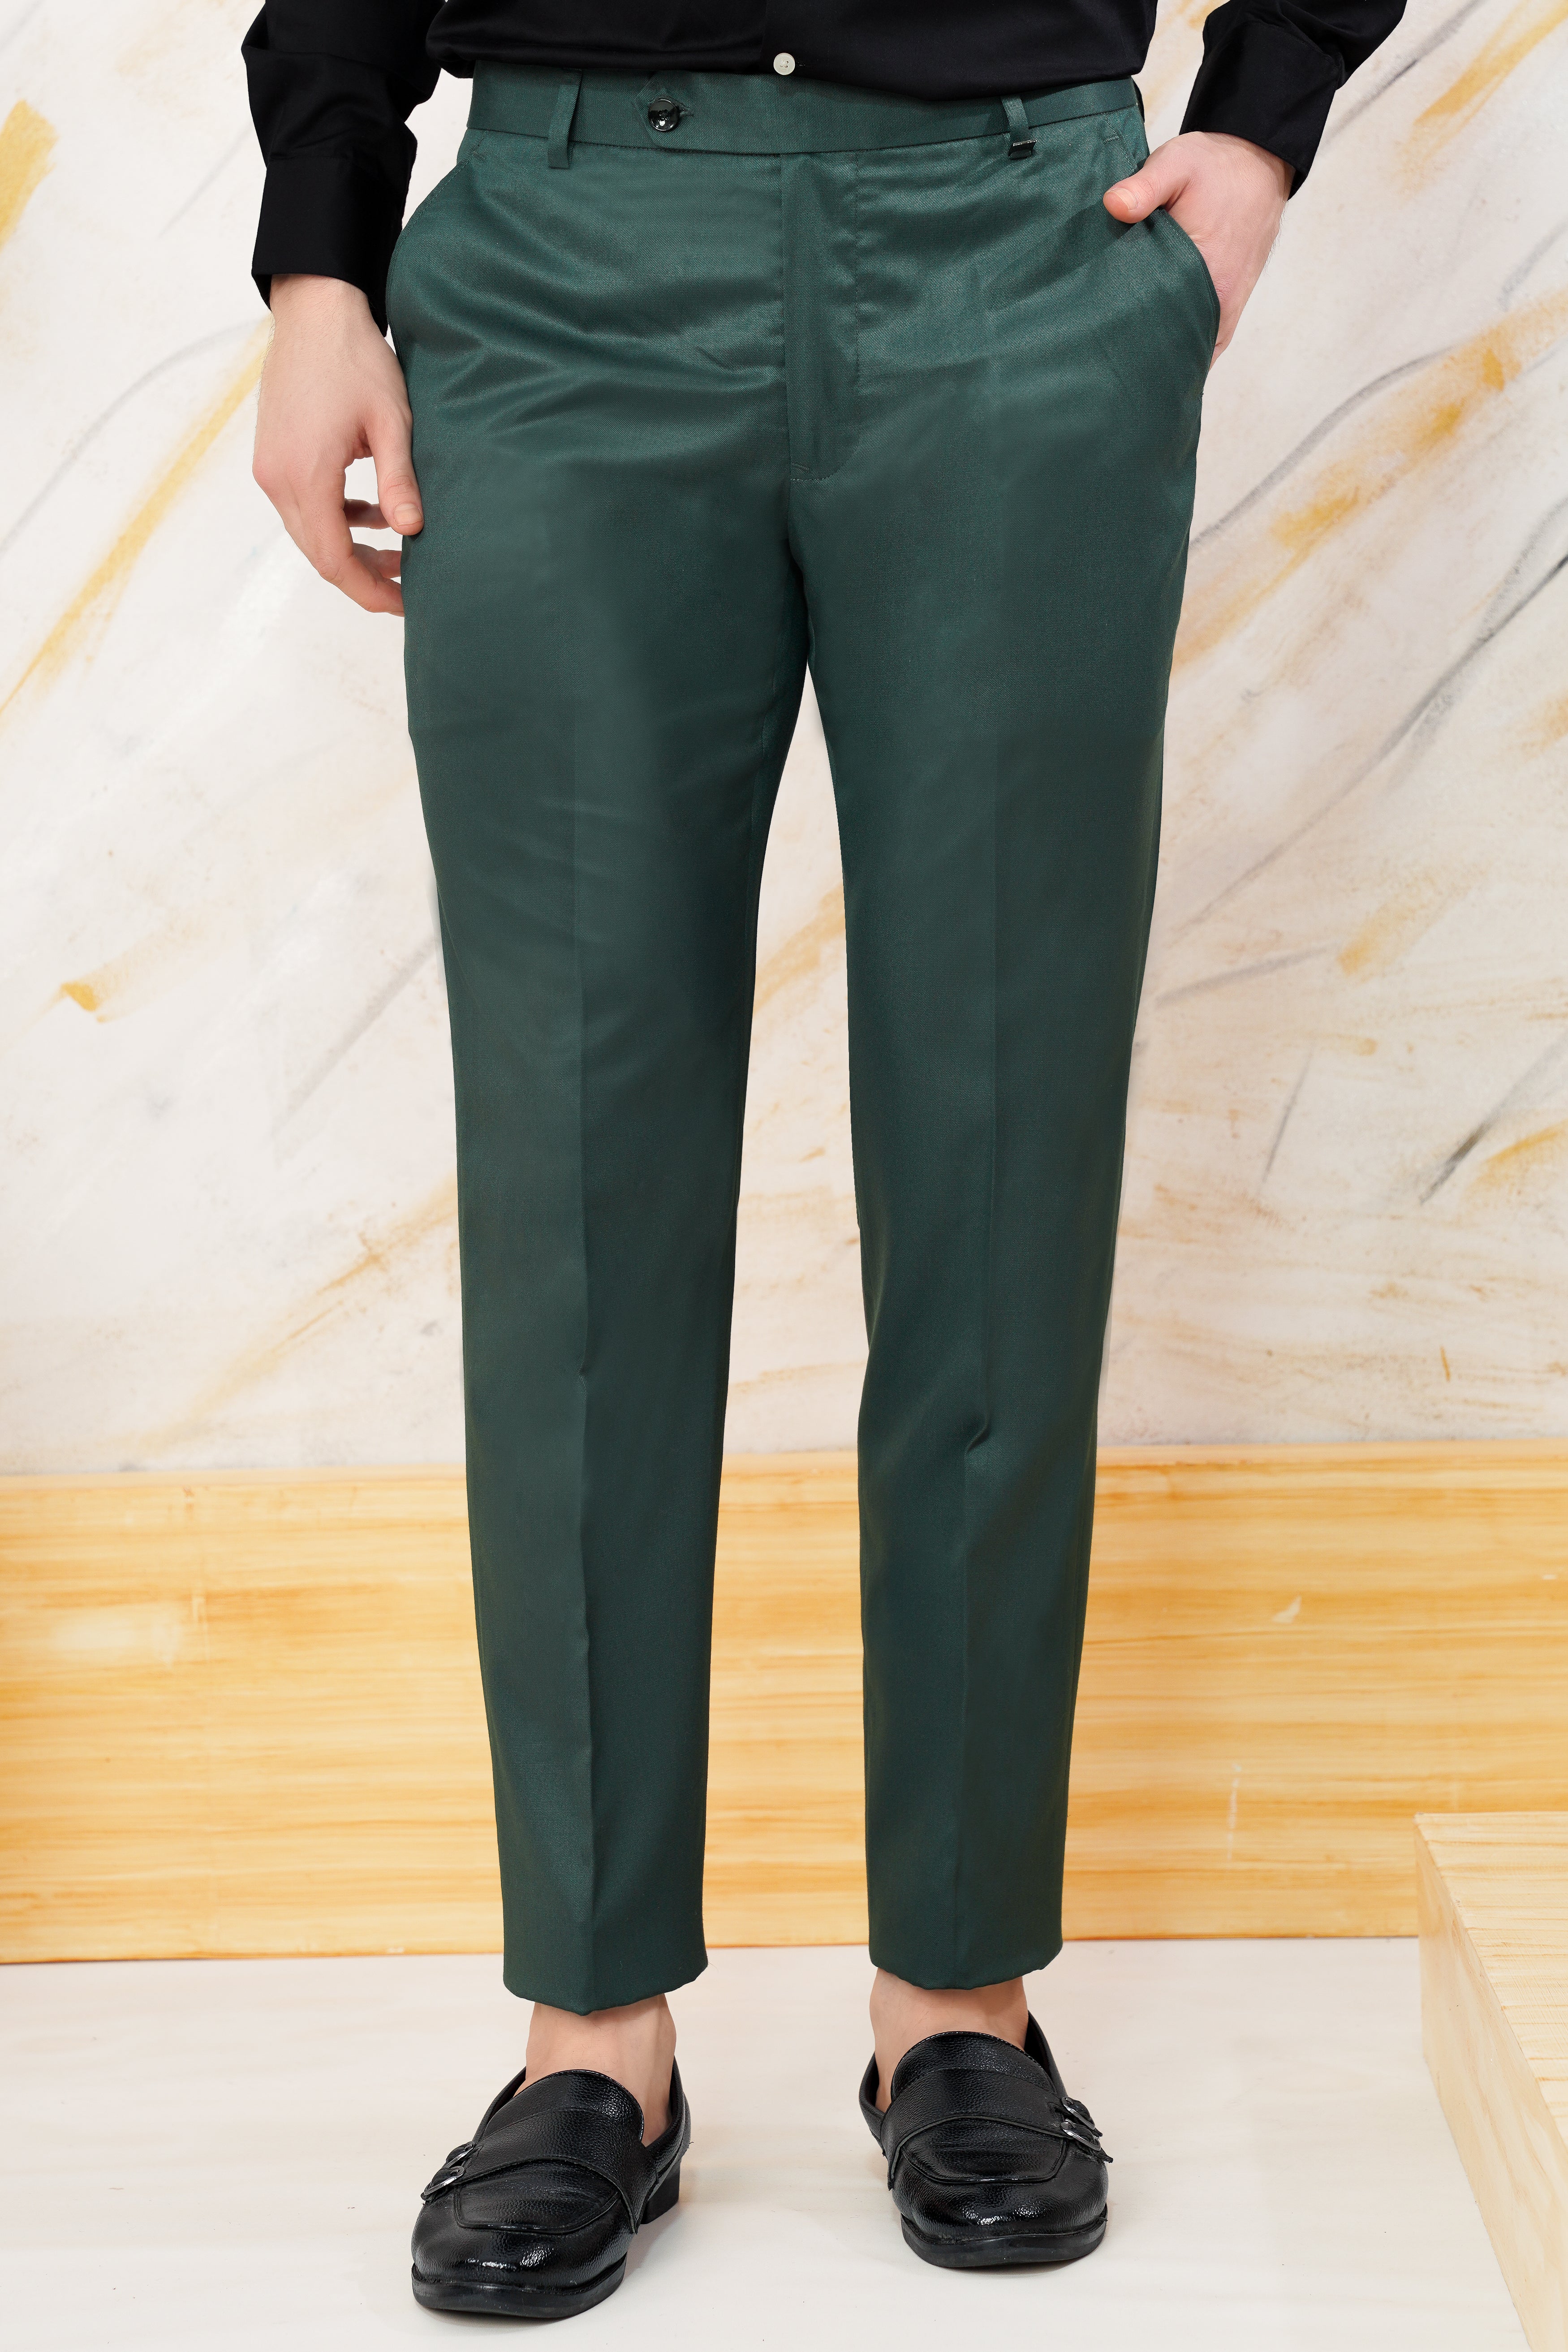 Buy Men's Formal Pants - Classic and Stylish Trousers for Every Occasion |  Olive Green (30) at Amazon.in